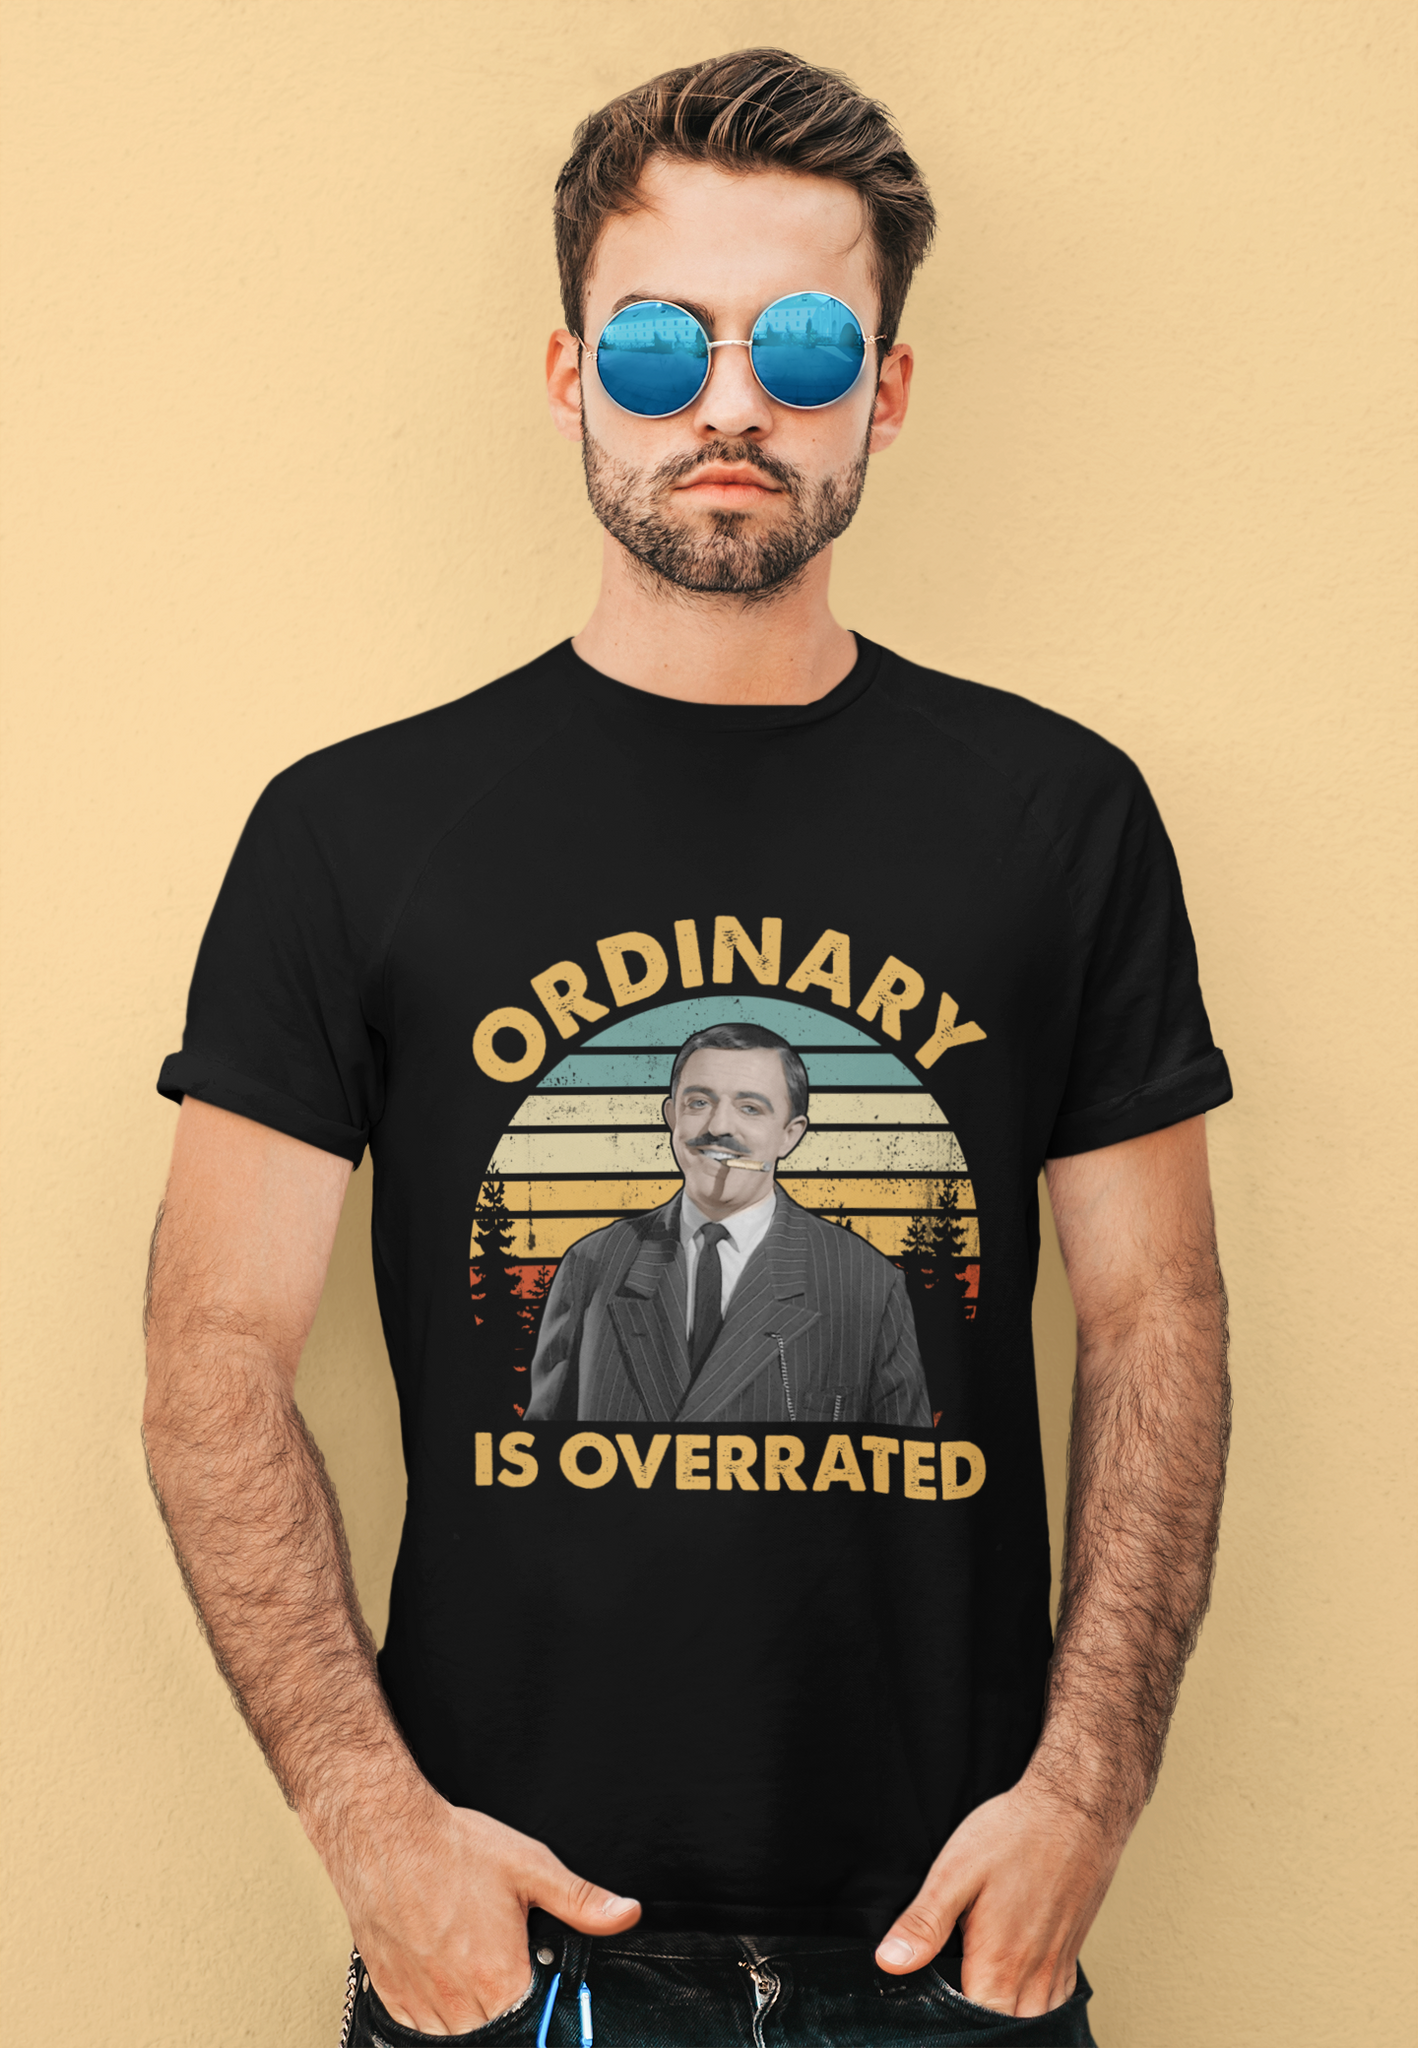 Addams Family Vintage T Shirt, Gomez Addams Tshirt, Ordinary Is Overrated Shirt, Halloween Gifts